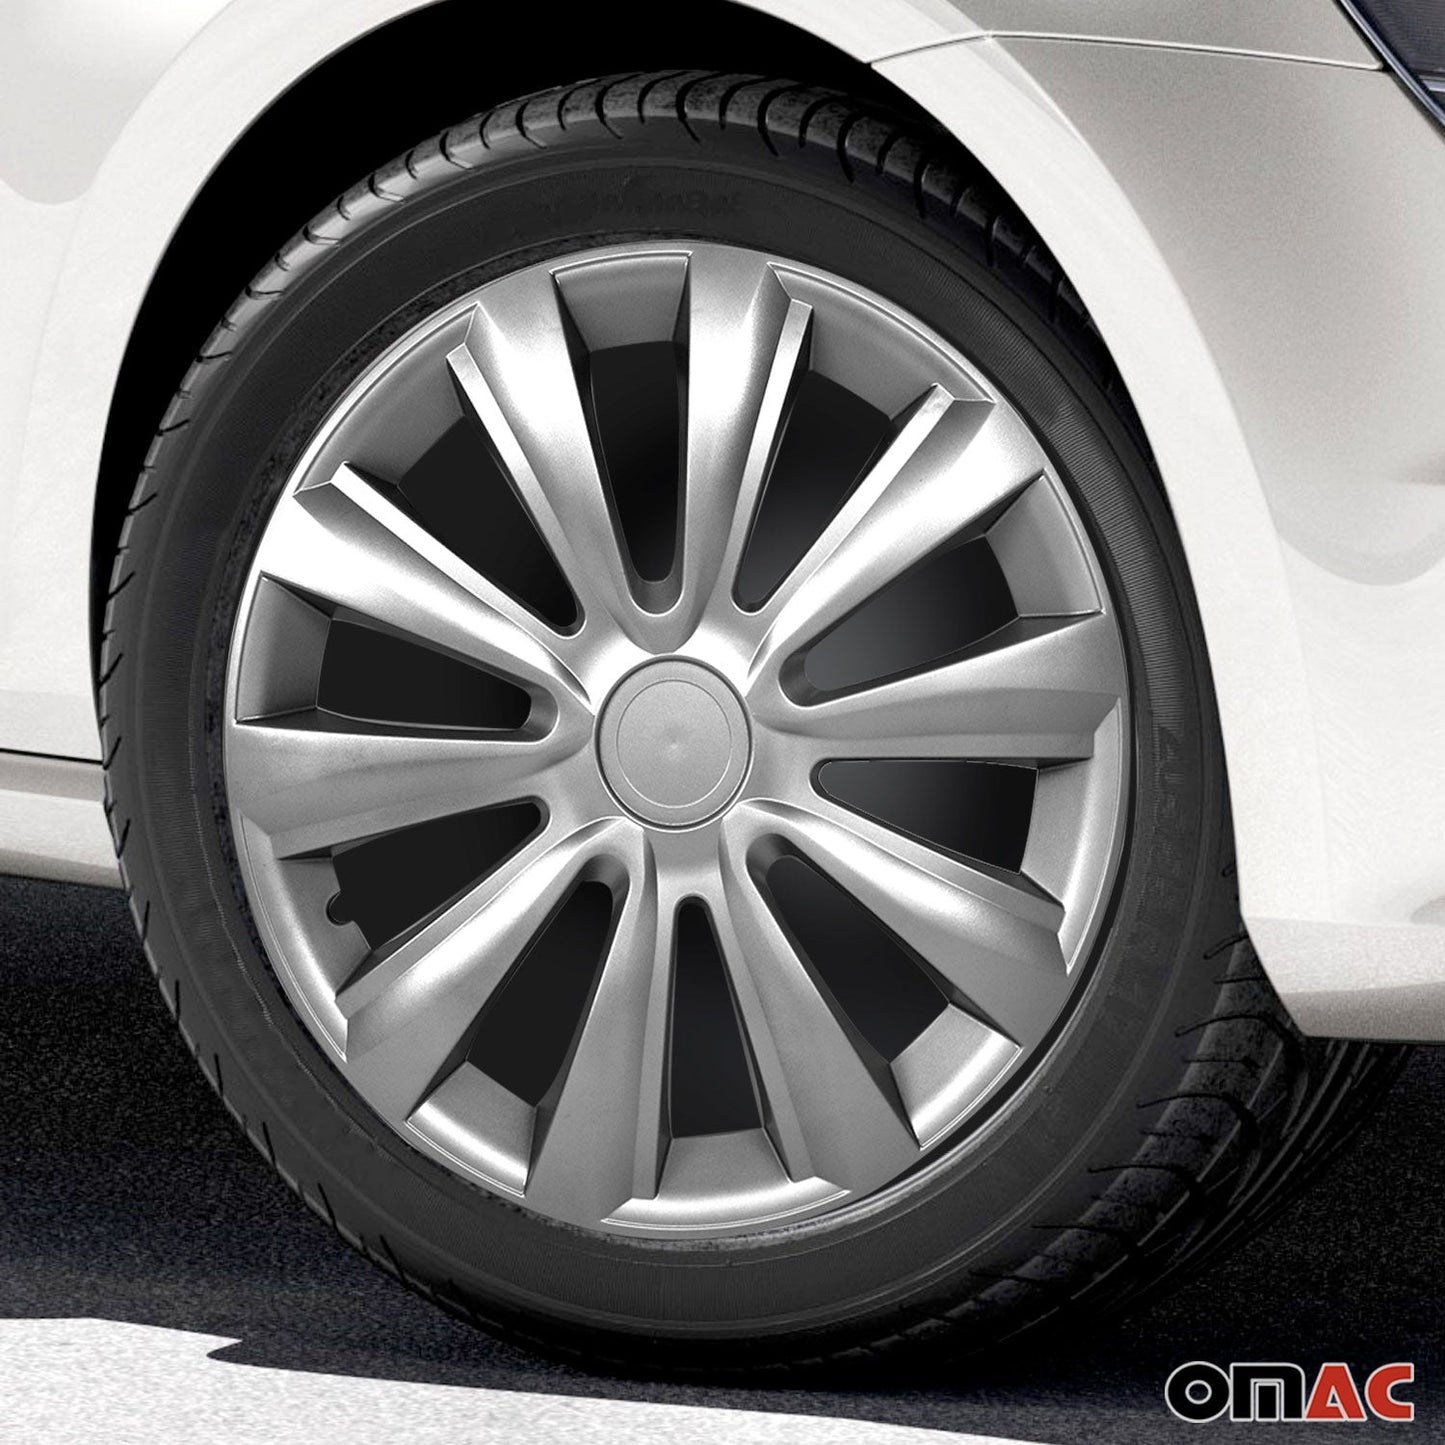 OMAC 16 Inch Wheel Covers Hubcaps for Lincoln Silver Gray Gloss G002344